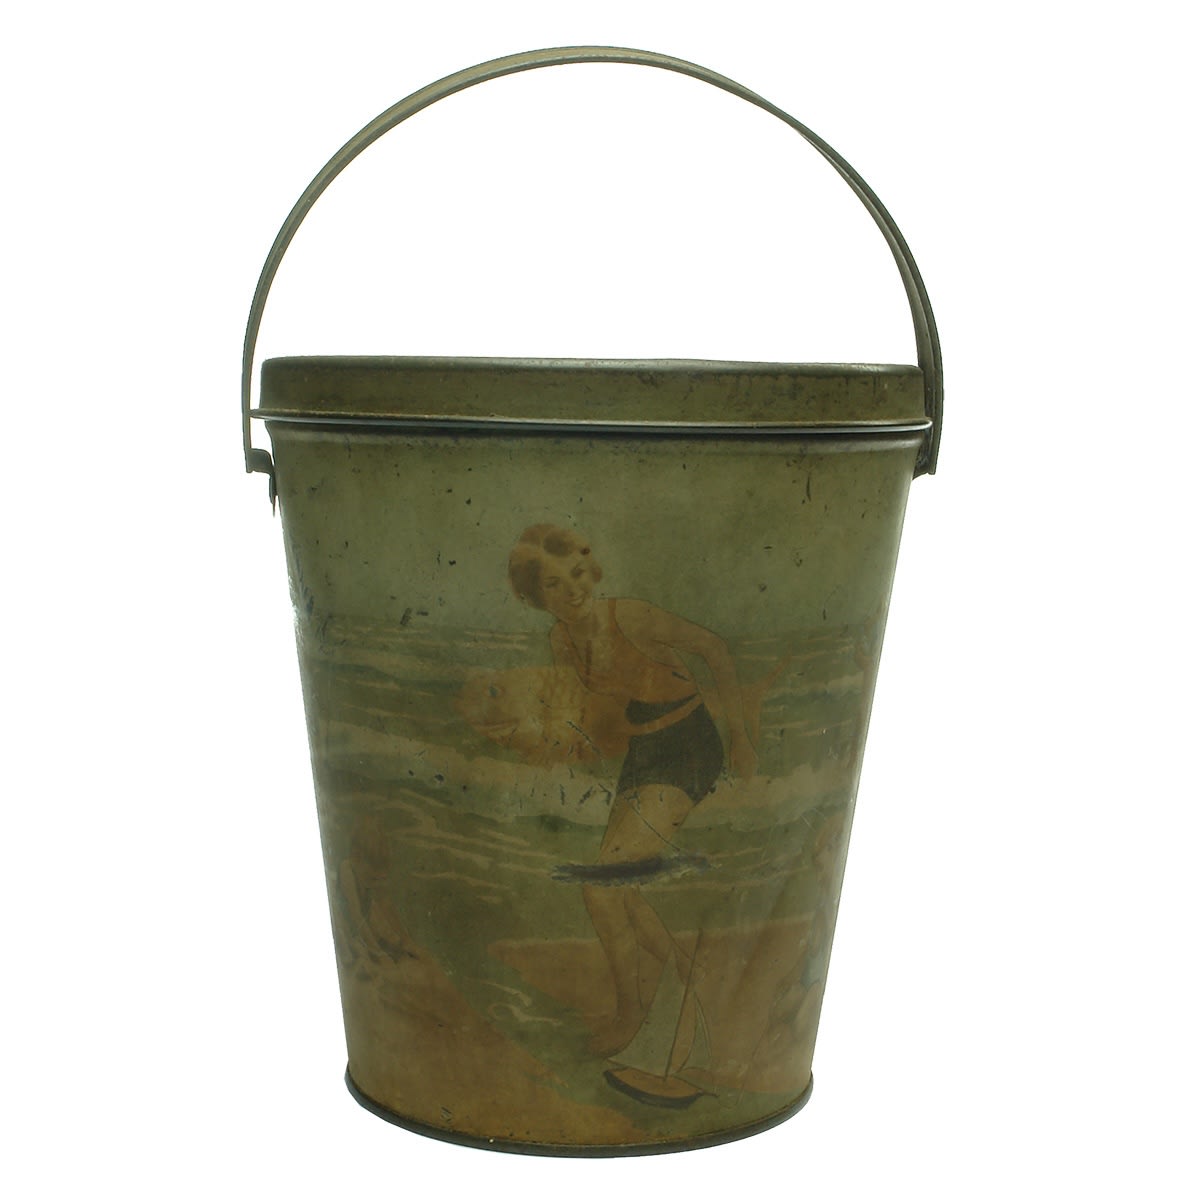 Tin Pail or Bucket with Beach scenes all around. William Arnott Ltd Biscuit Manufacturers Homebush. (New South Wales)